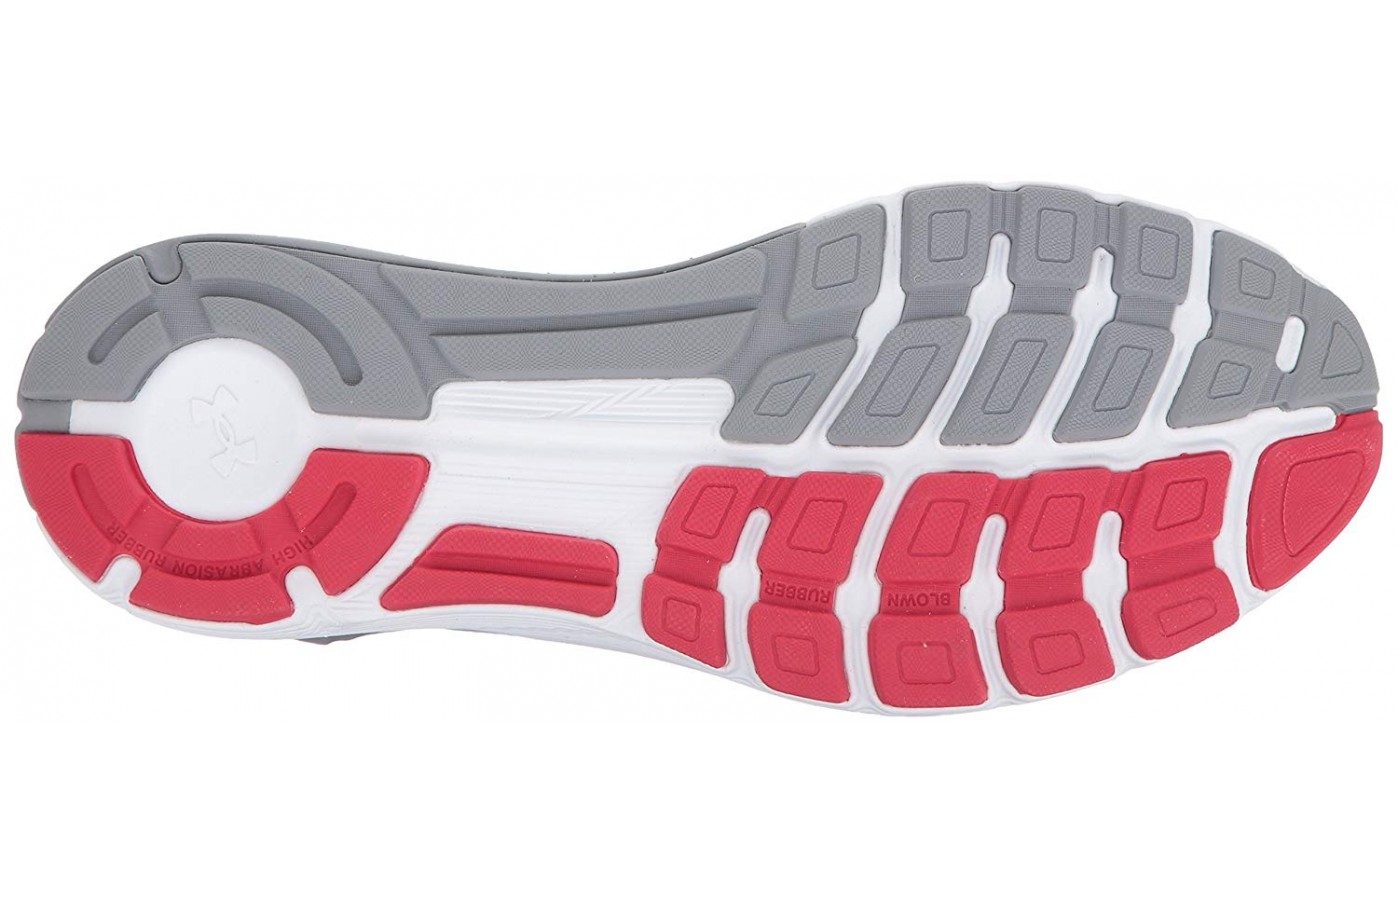 A lot of rubber is used in the design of the outsole of this shoe.